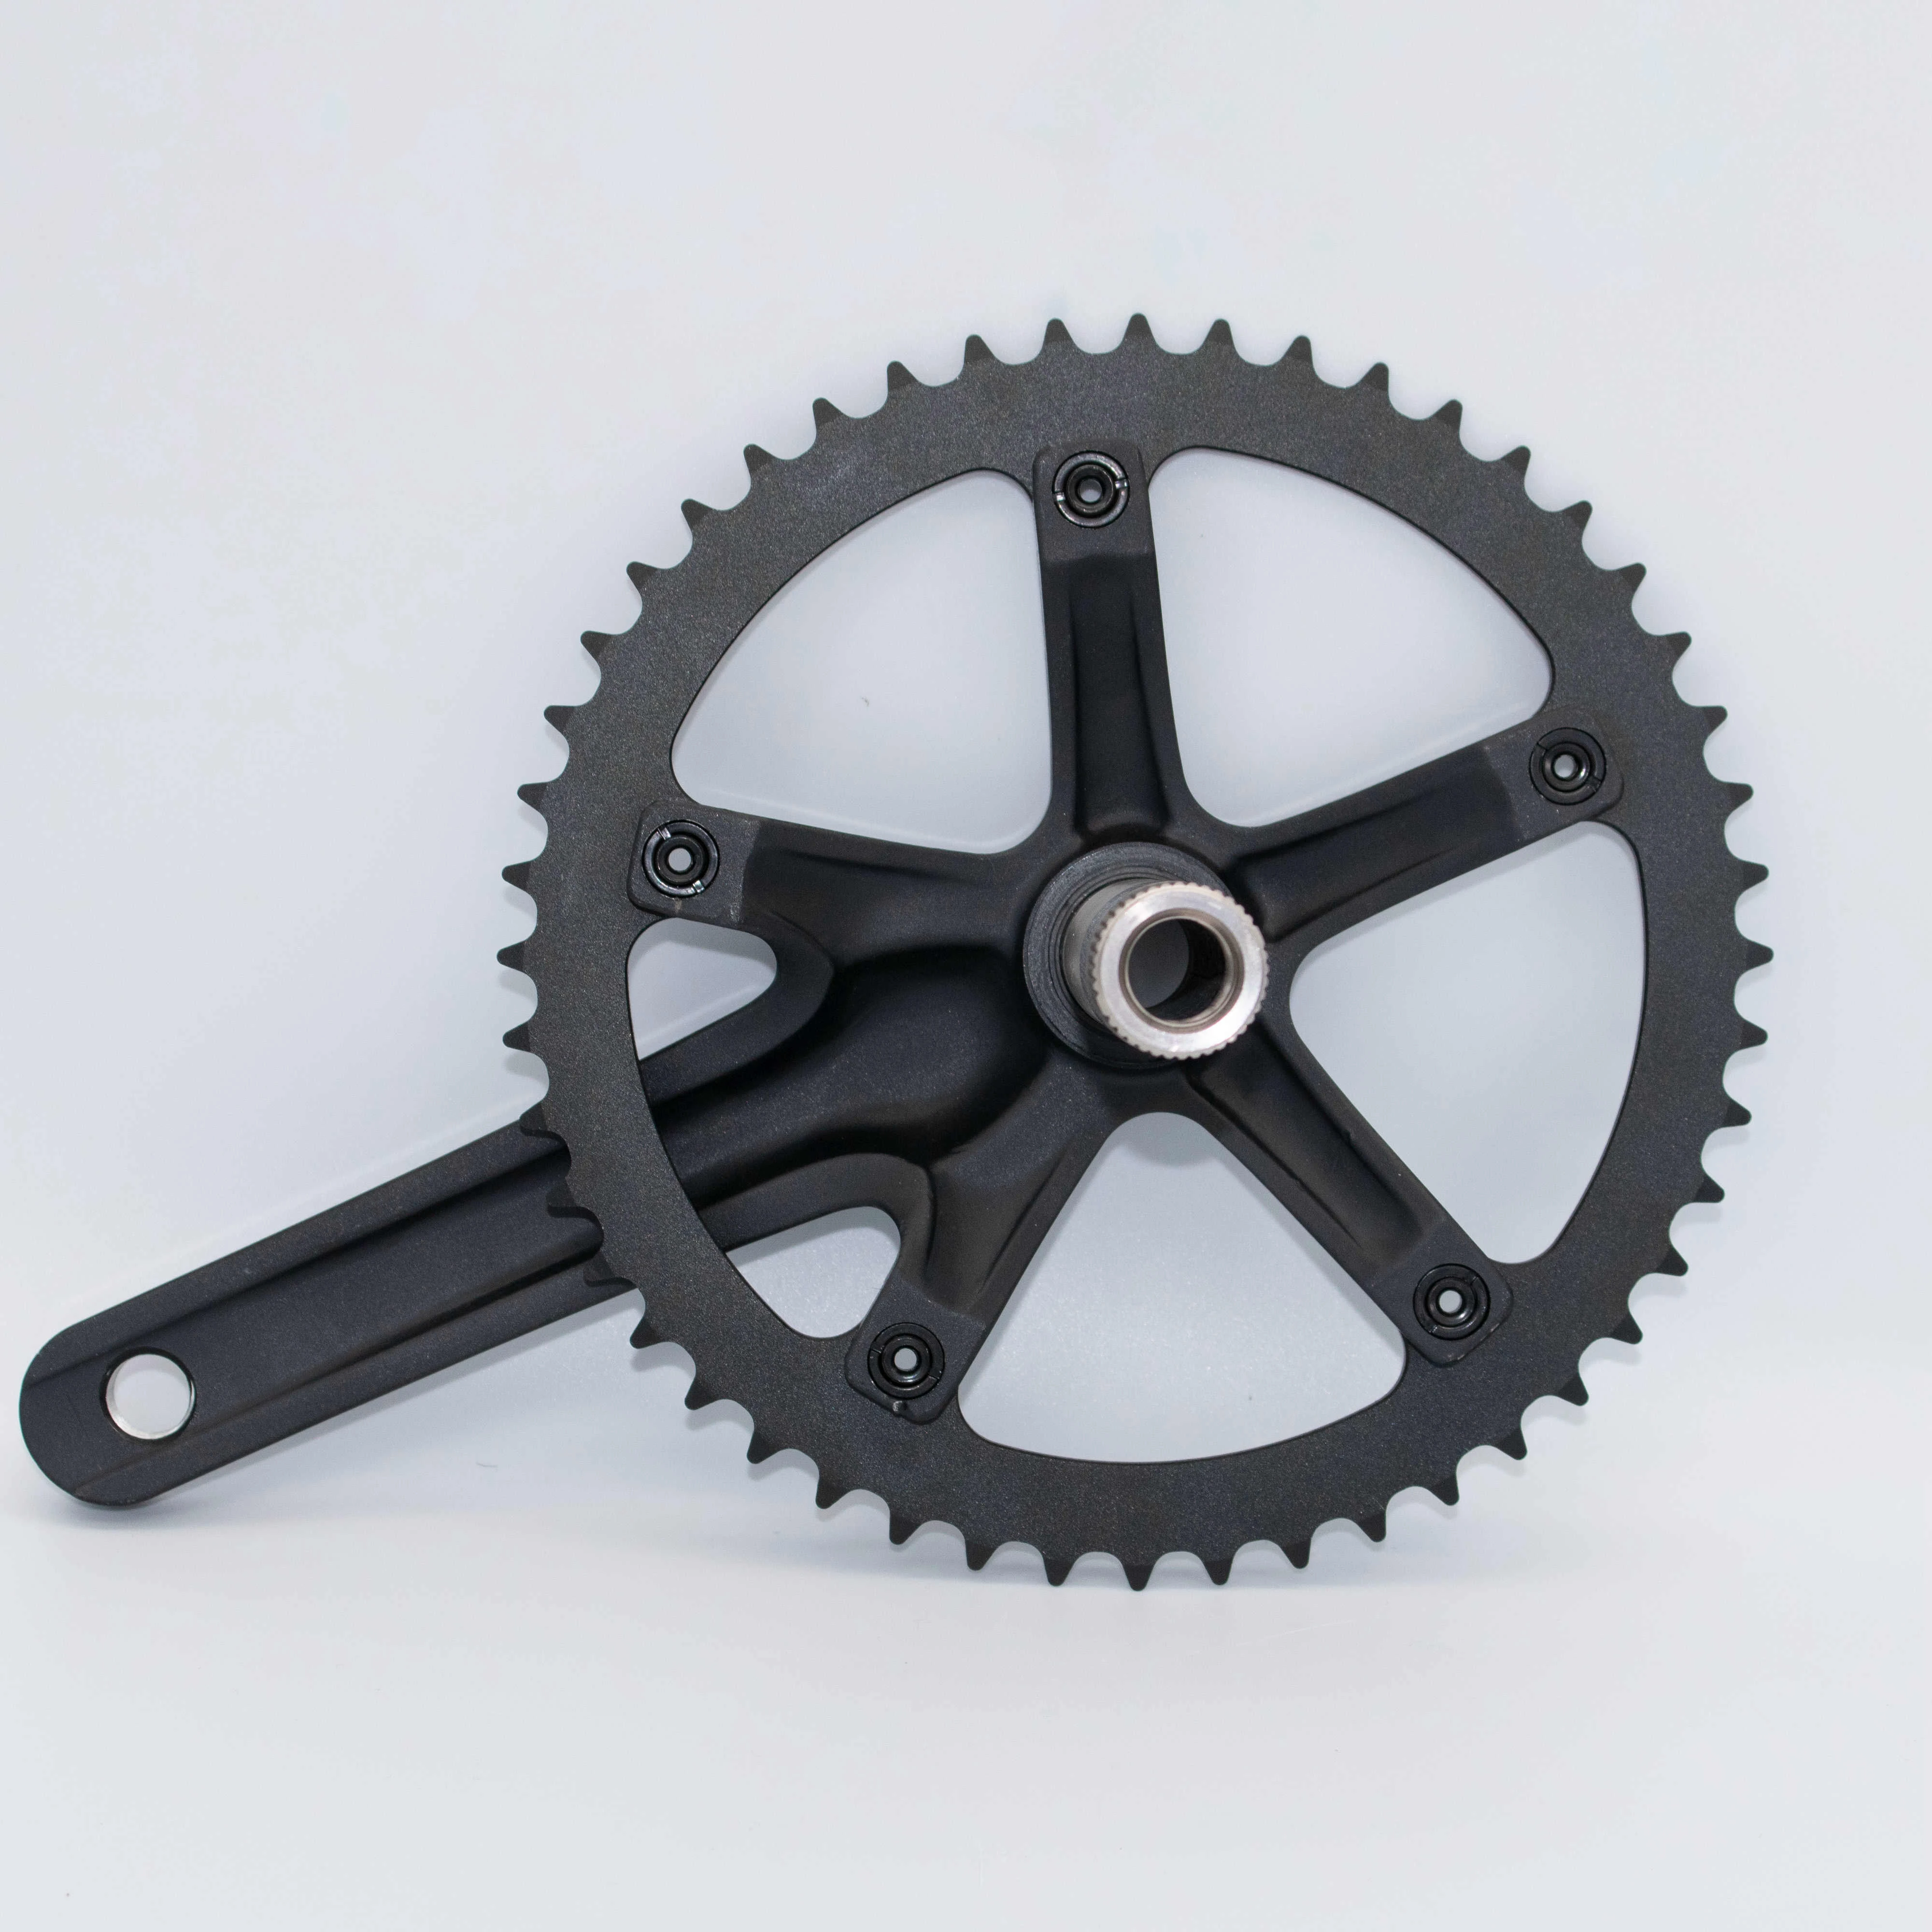 City Modern Style Single Speed 46/48/49T and 165mm Aluminum Bicycle Crankset With New Bottom Bracket